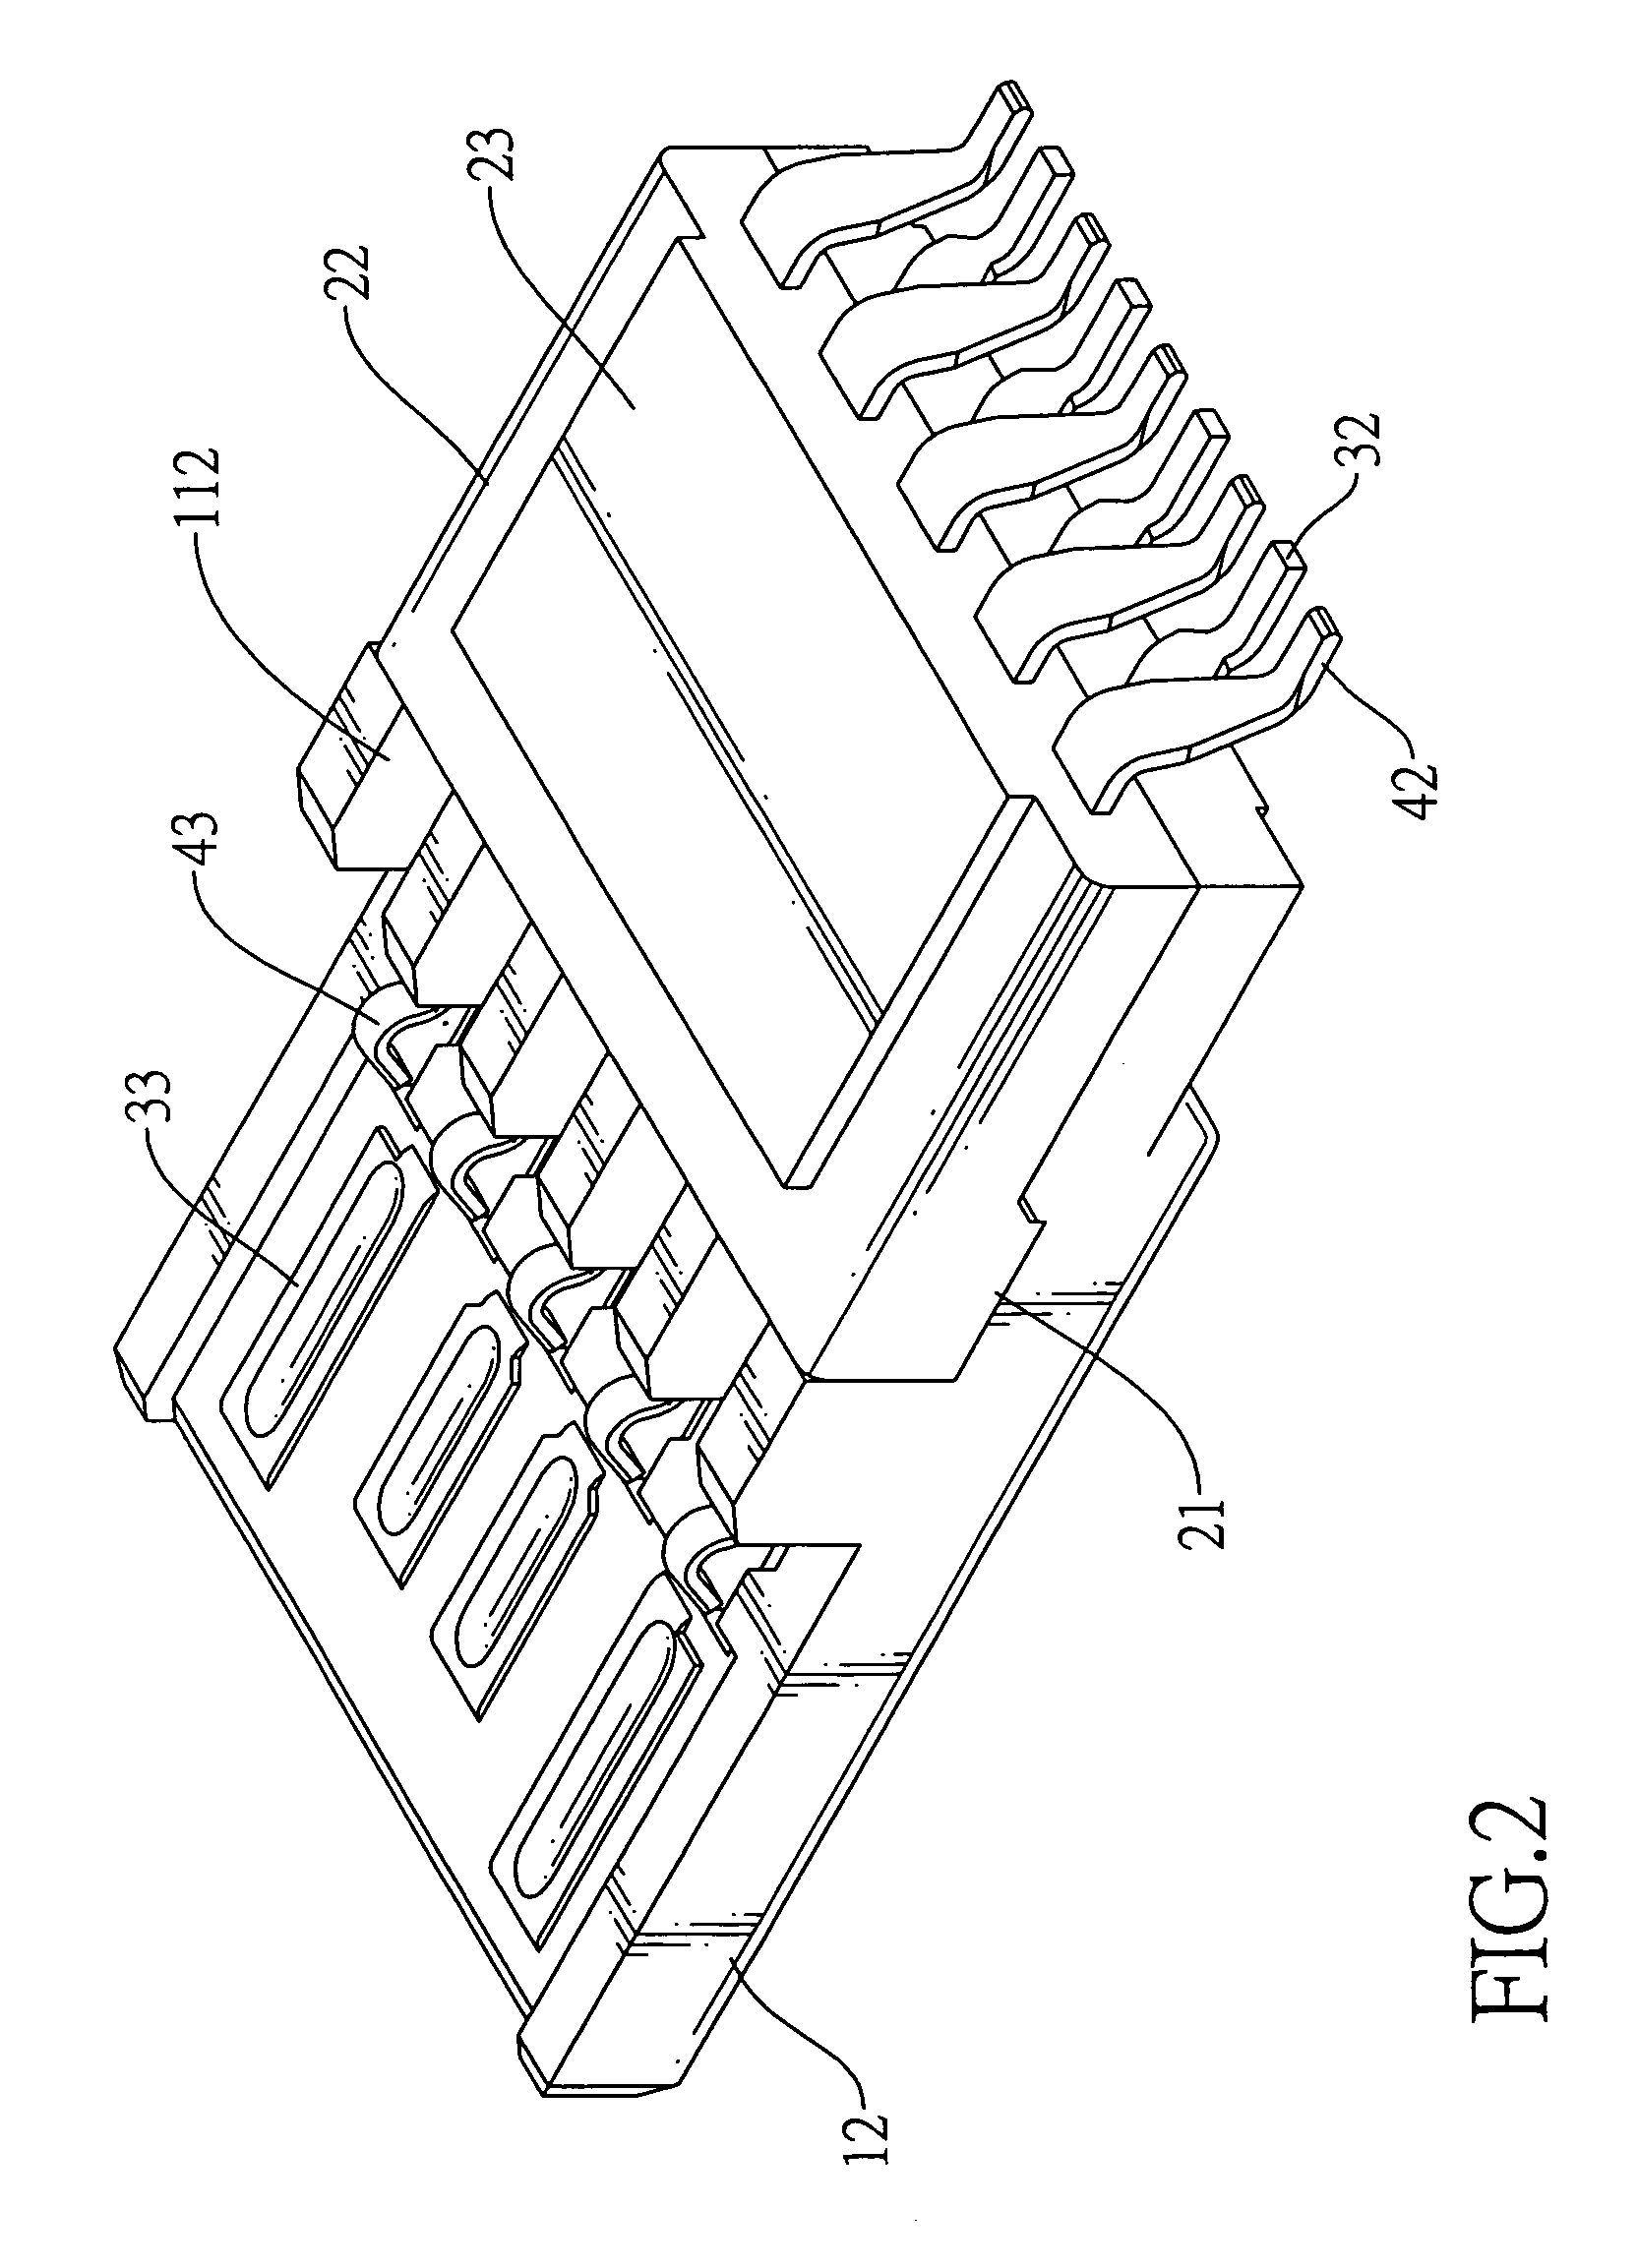 High-speed plug connector with a mounting bracket holding terminals